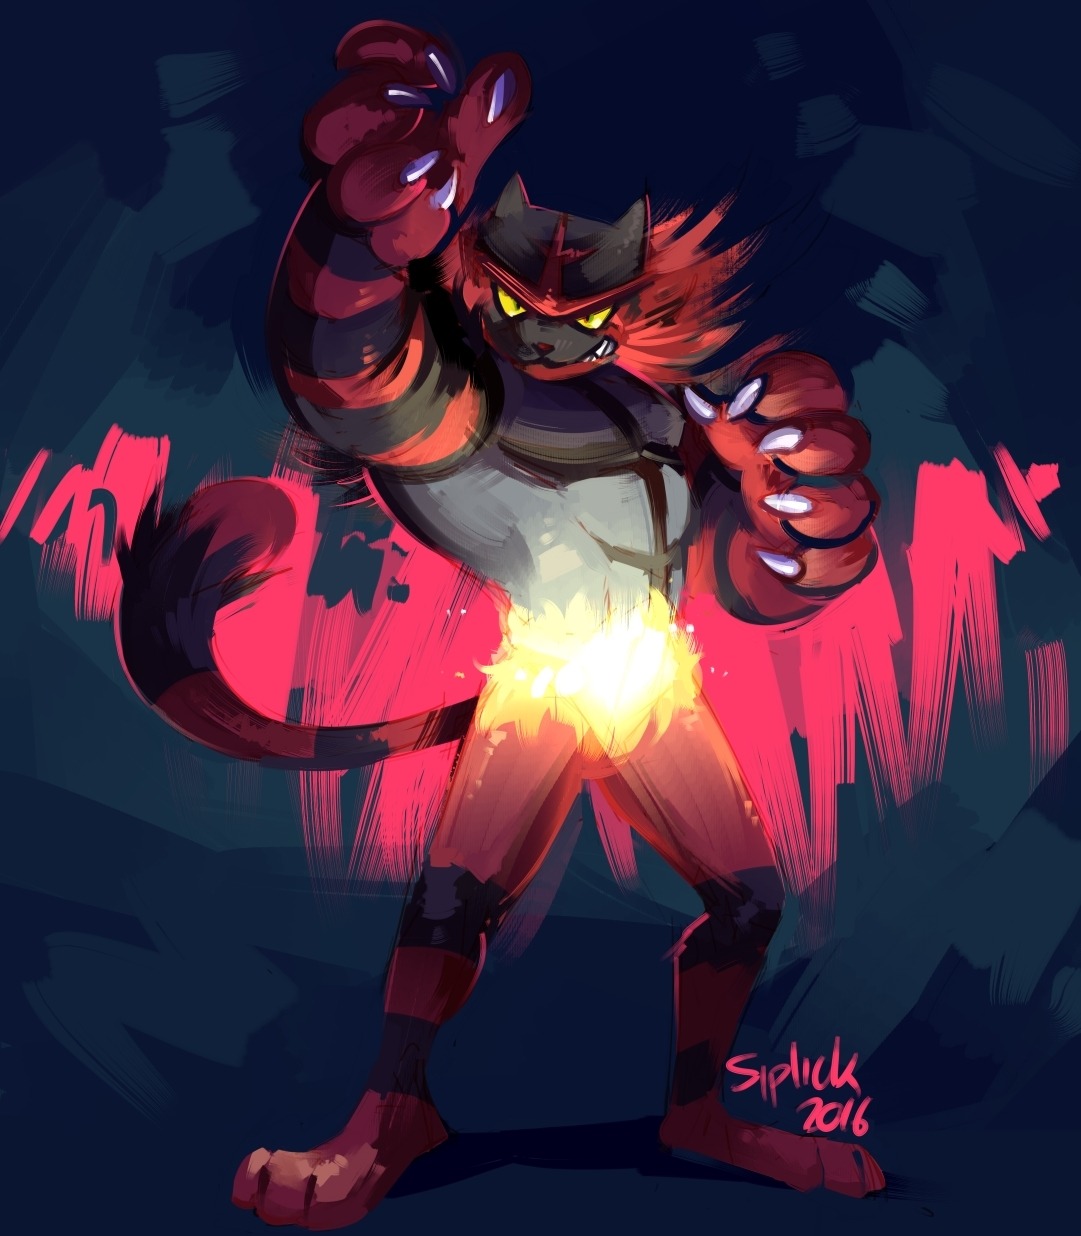 daftlynx:  Me, yesterday: I’d never evolve my Torracat, I love it the way it is